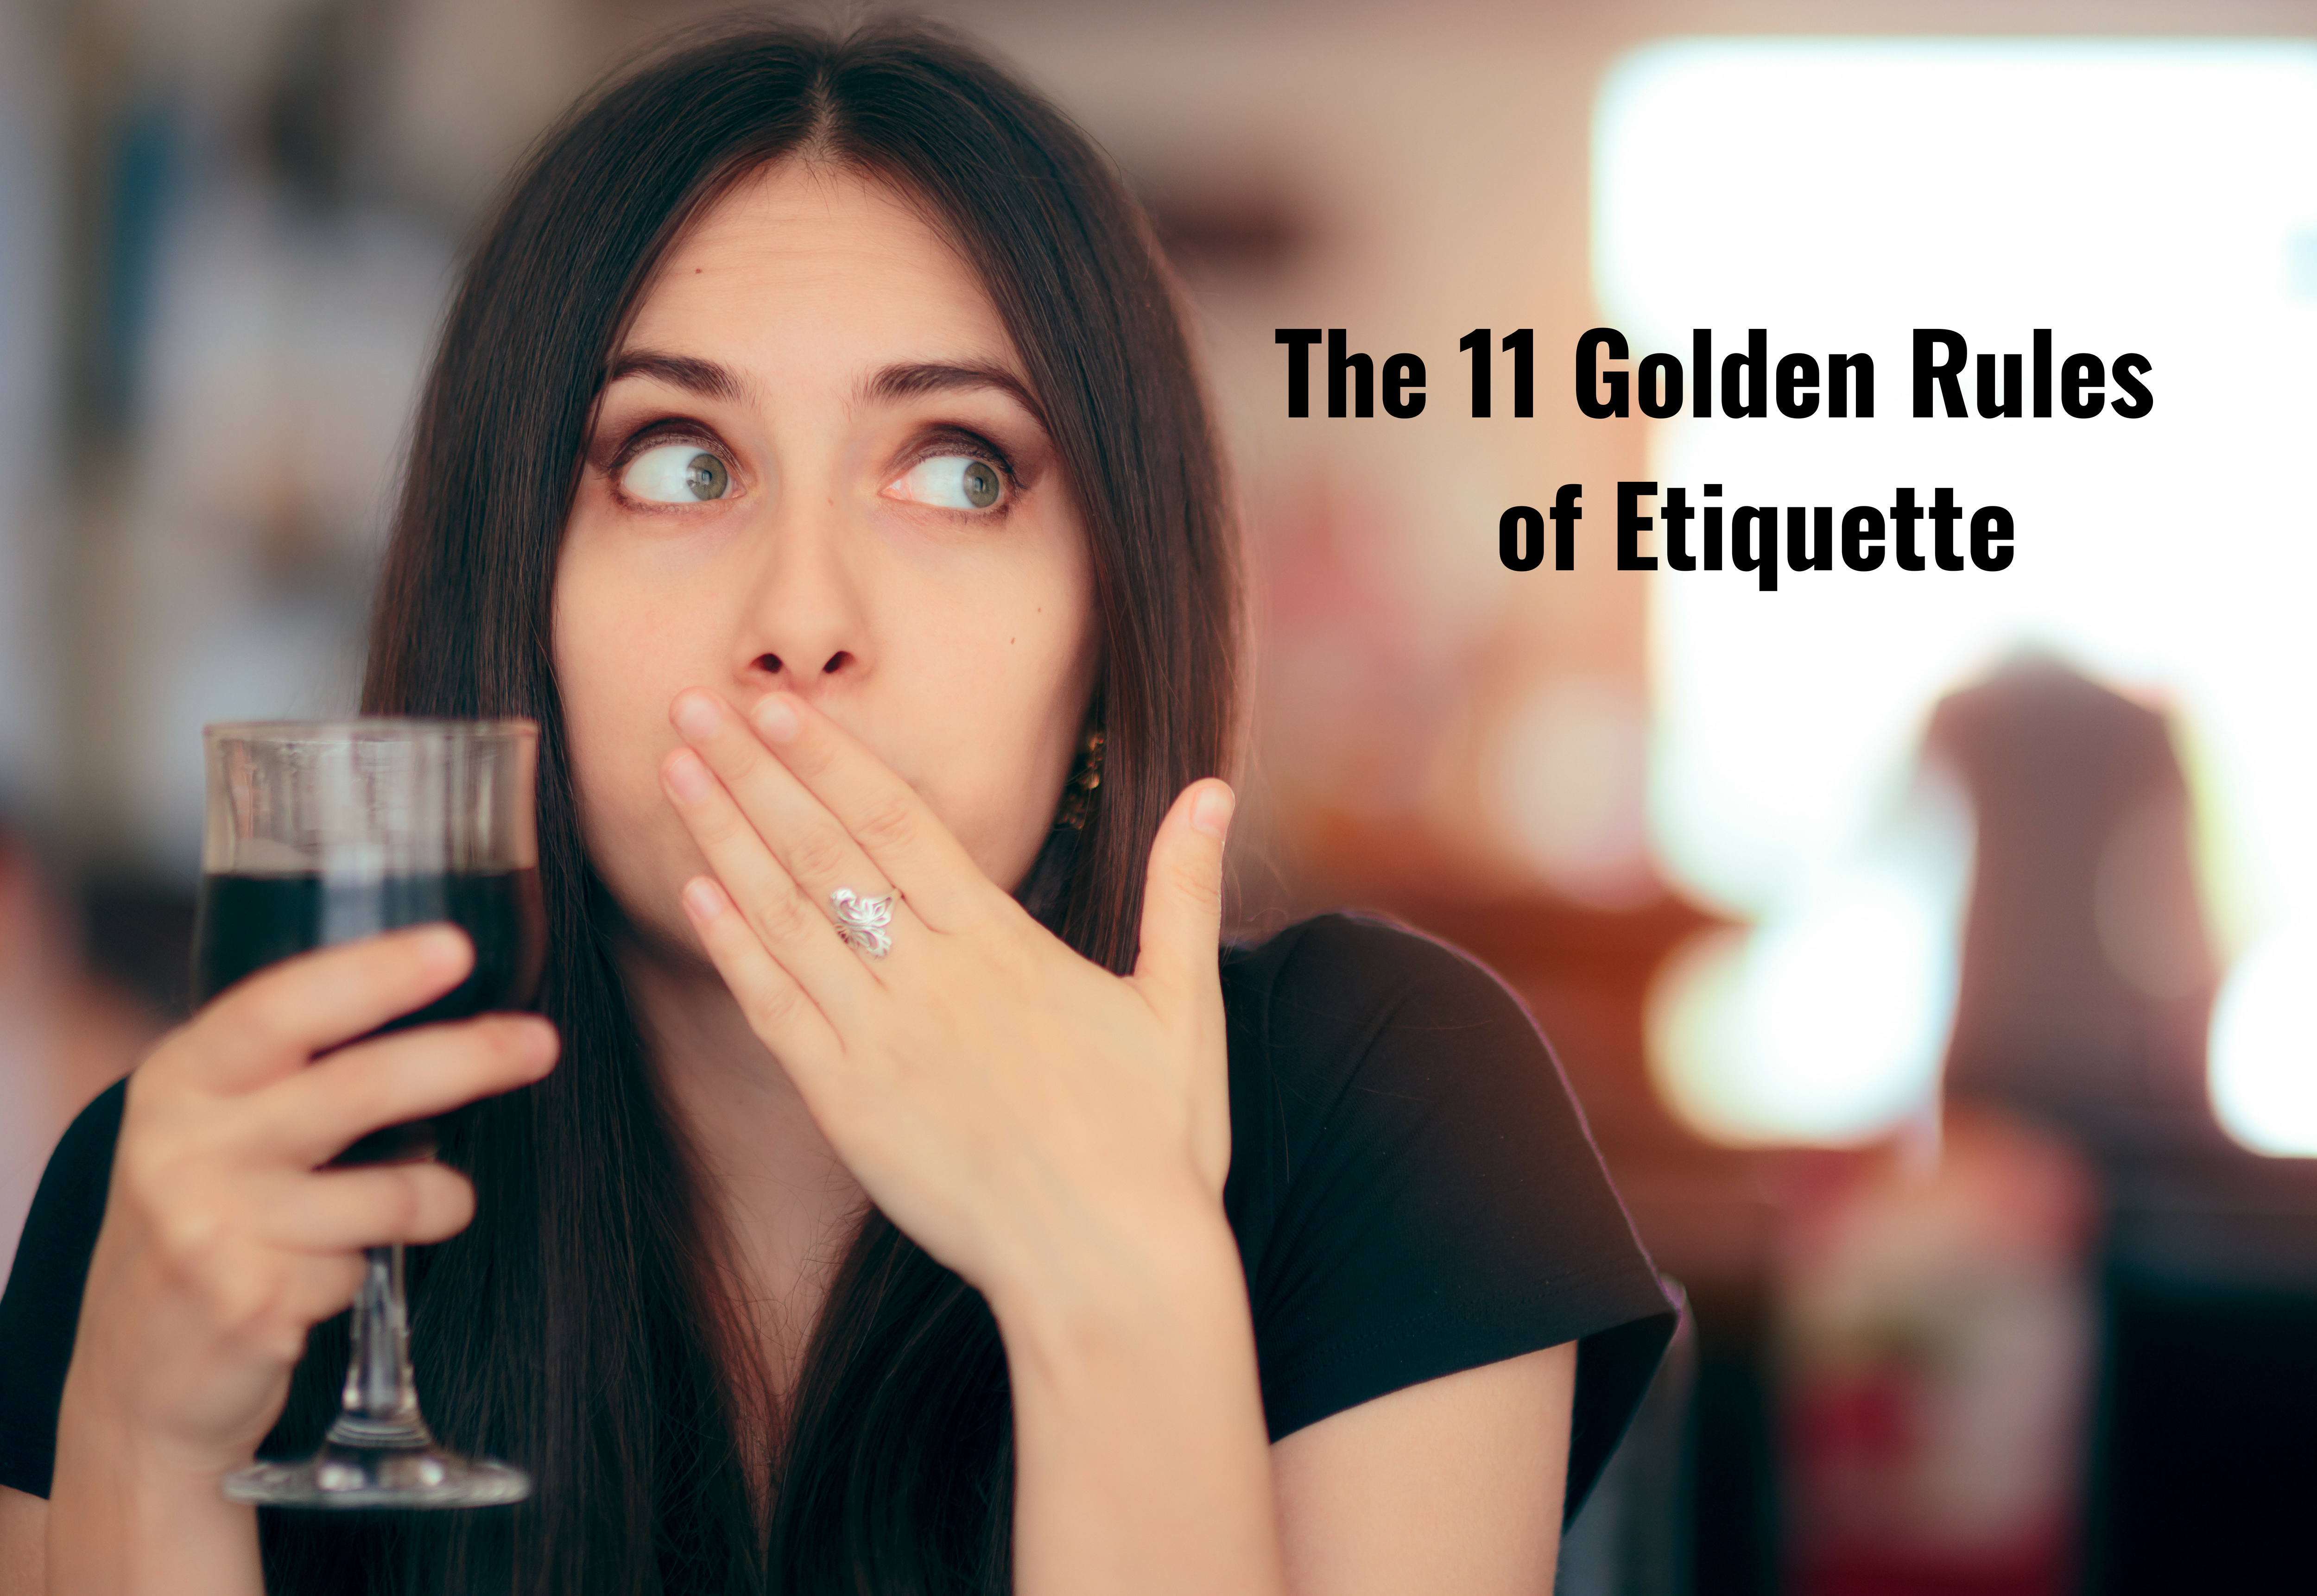 The 11 golden rules of etiquette